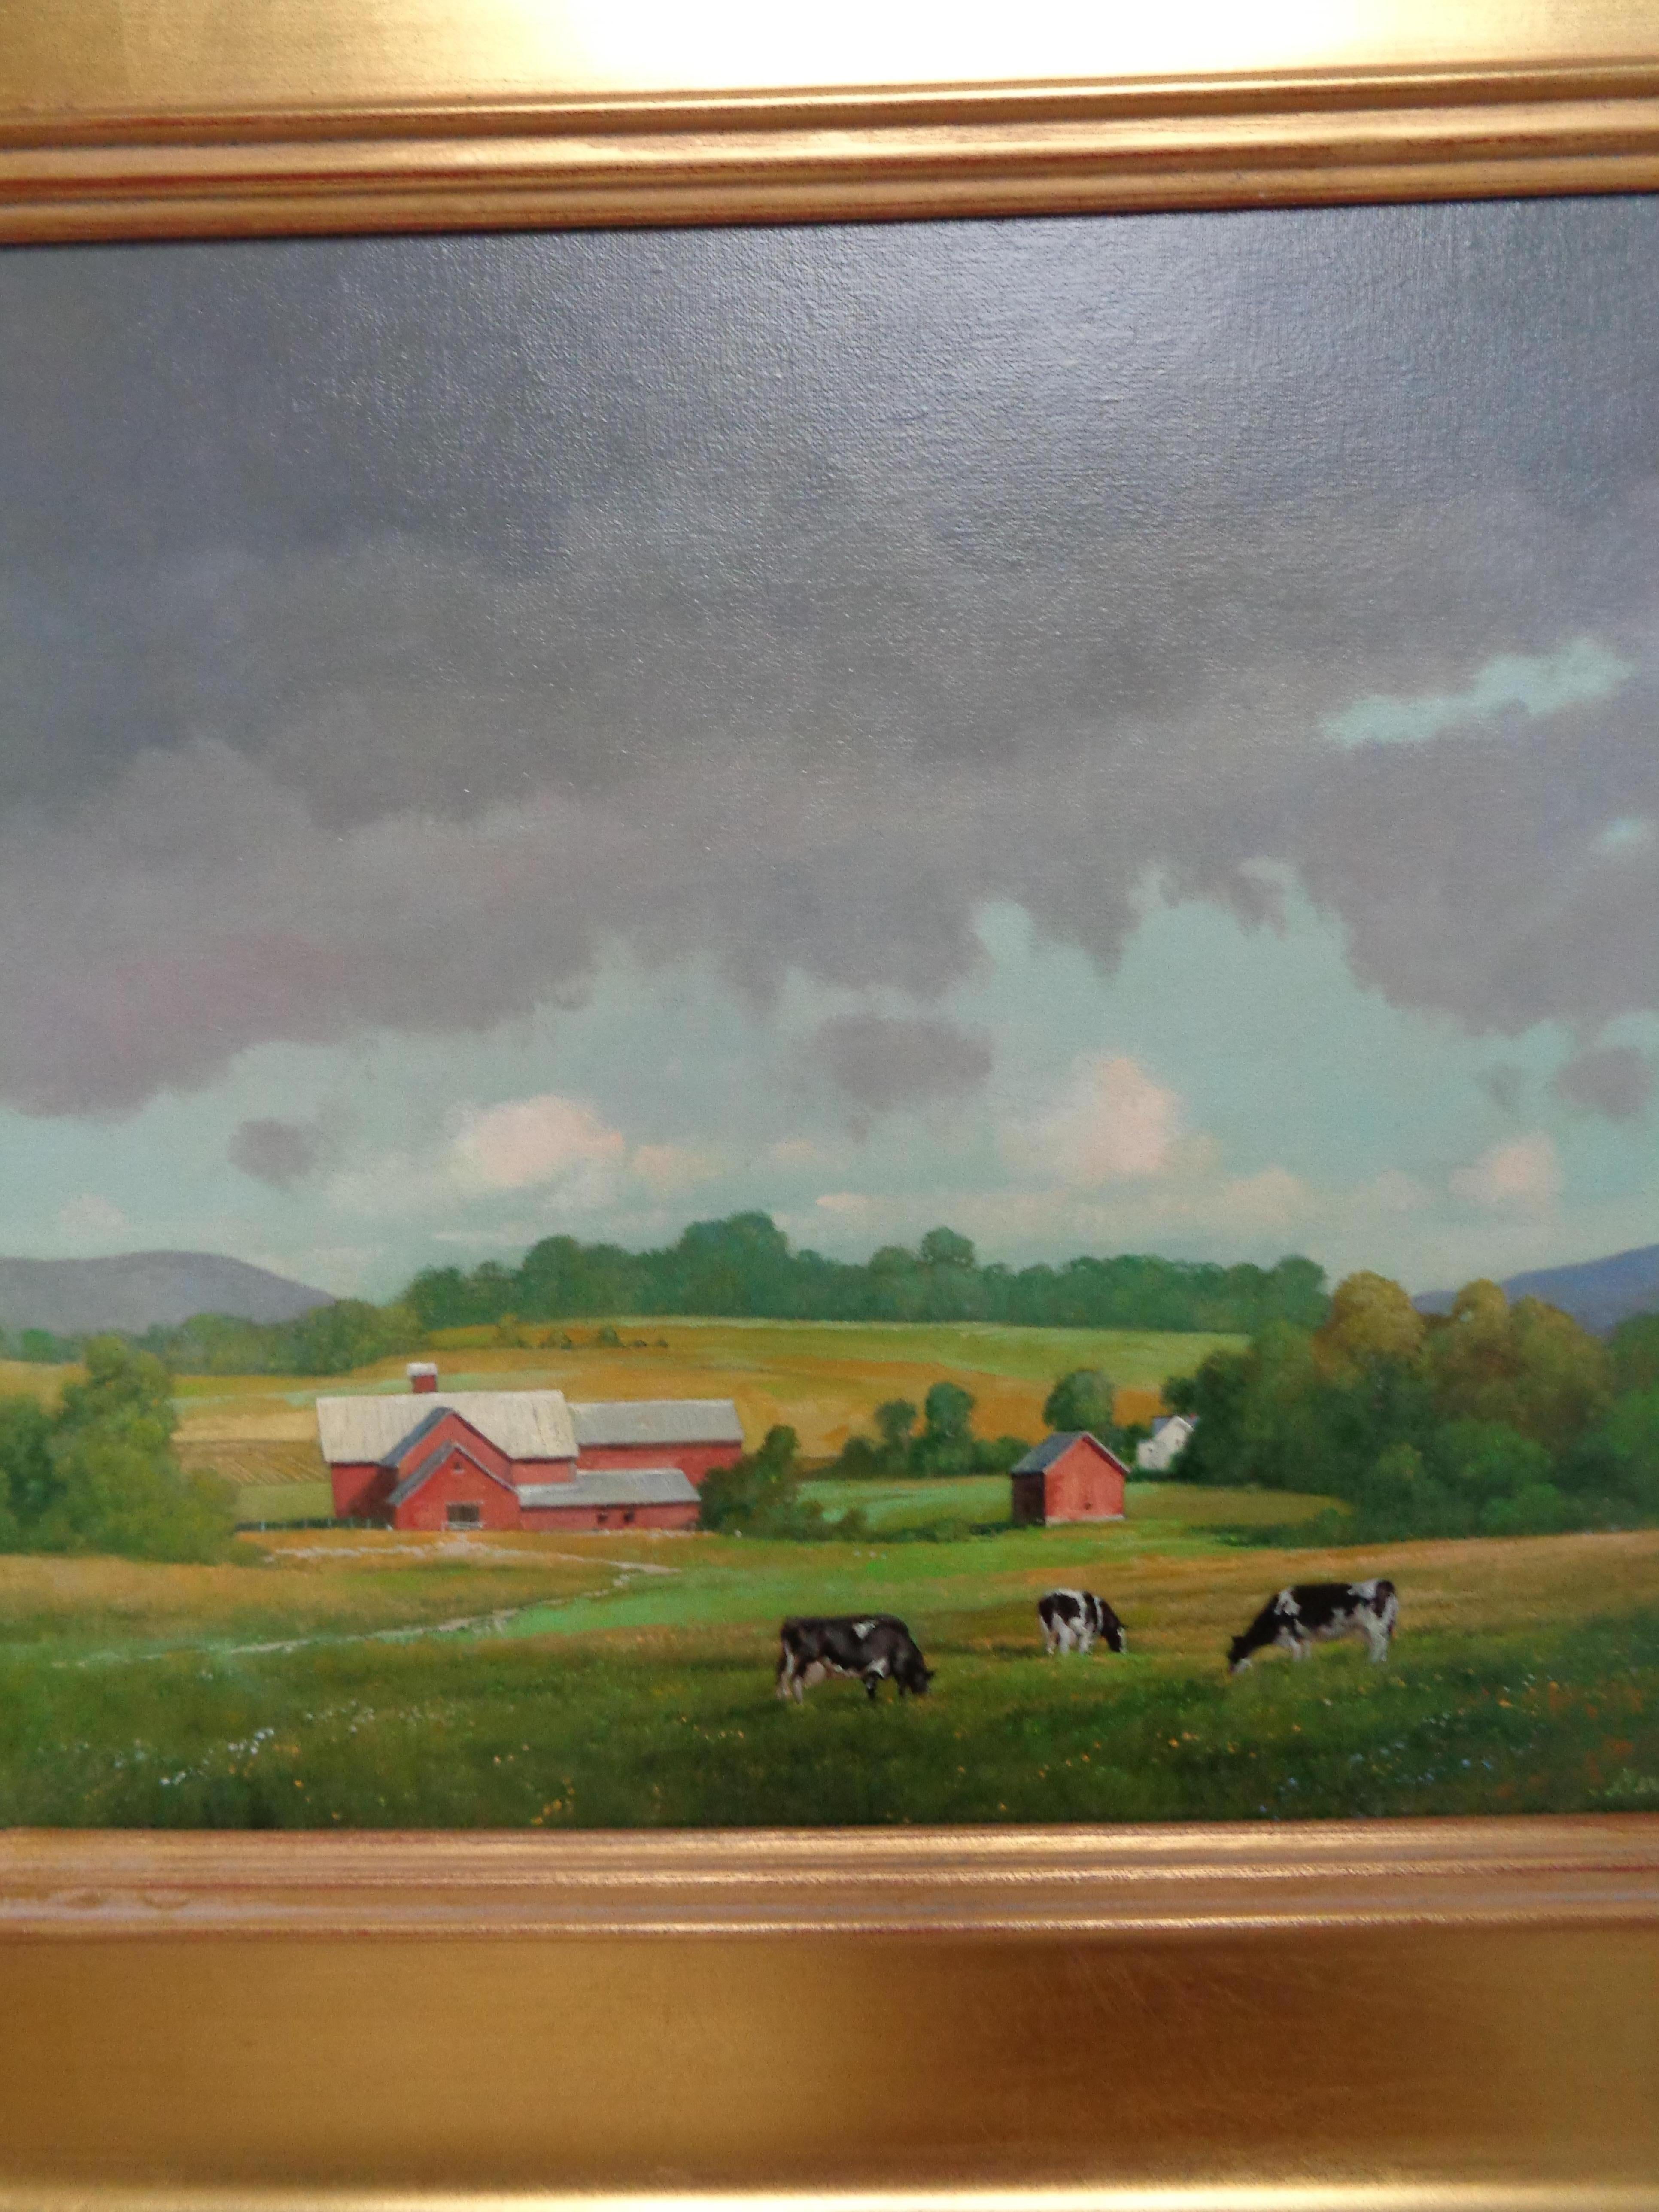 Upland Pasture
oil/panel framed
Salmagundi Club Auction 2007 with auction label
I purchased this painting as is in 2007 at the Salmagundi Club Auction and have owned it since. 

Gerald Lubeck
Born in 1942 in Long Branch NJ and upon graduation from